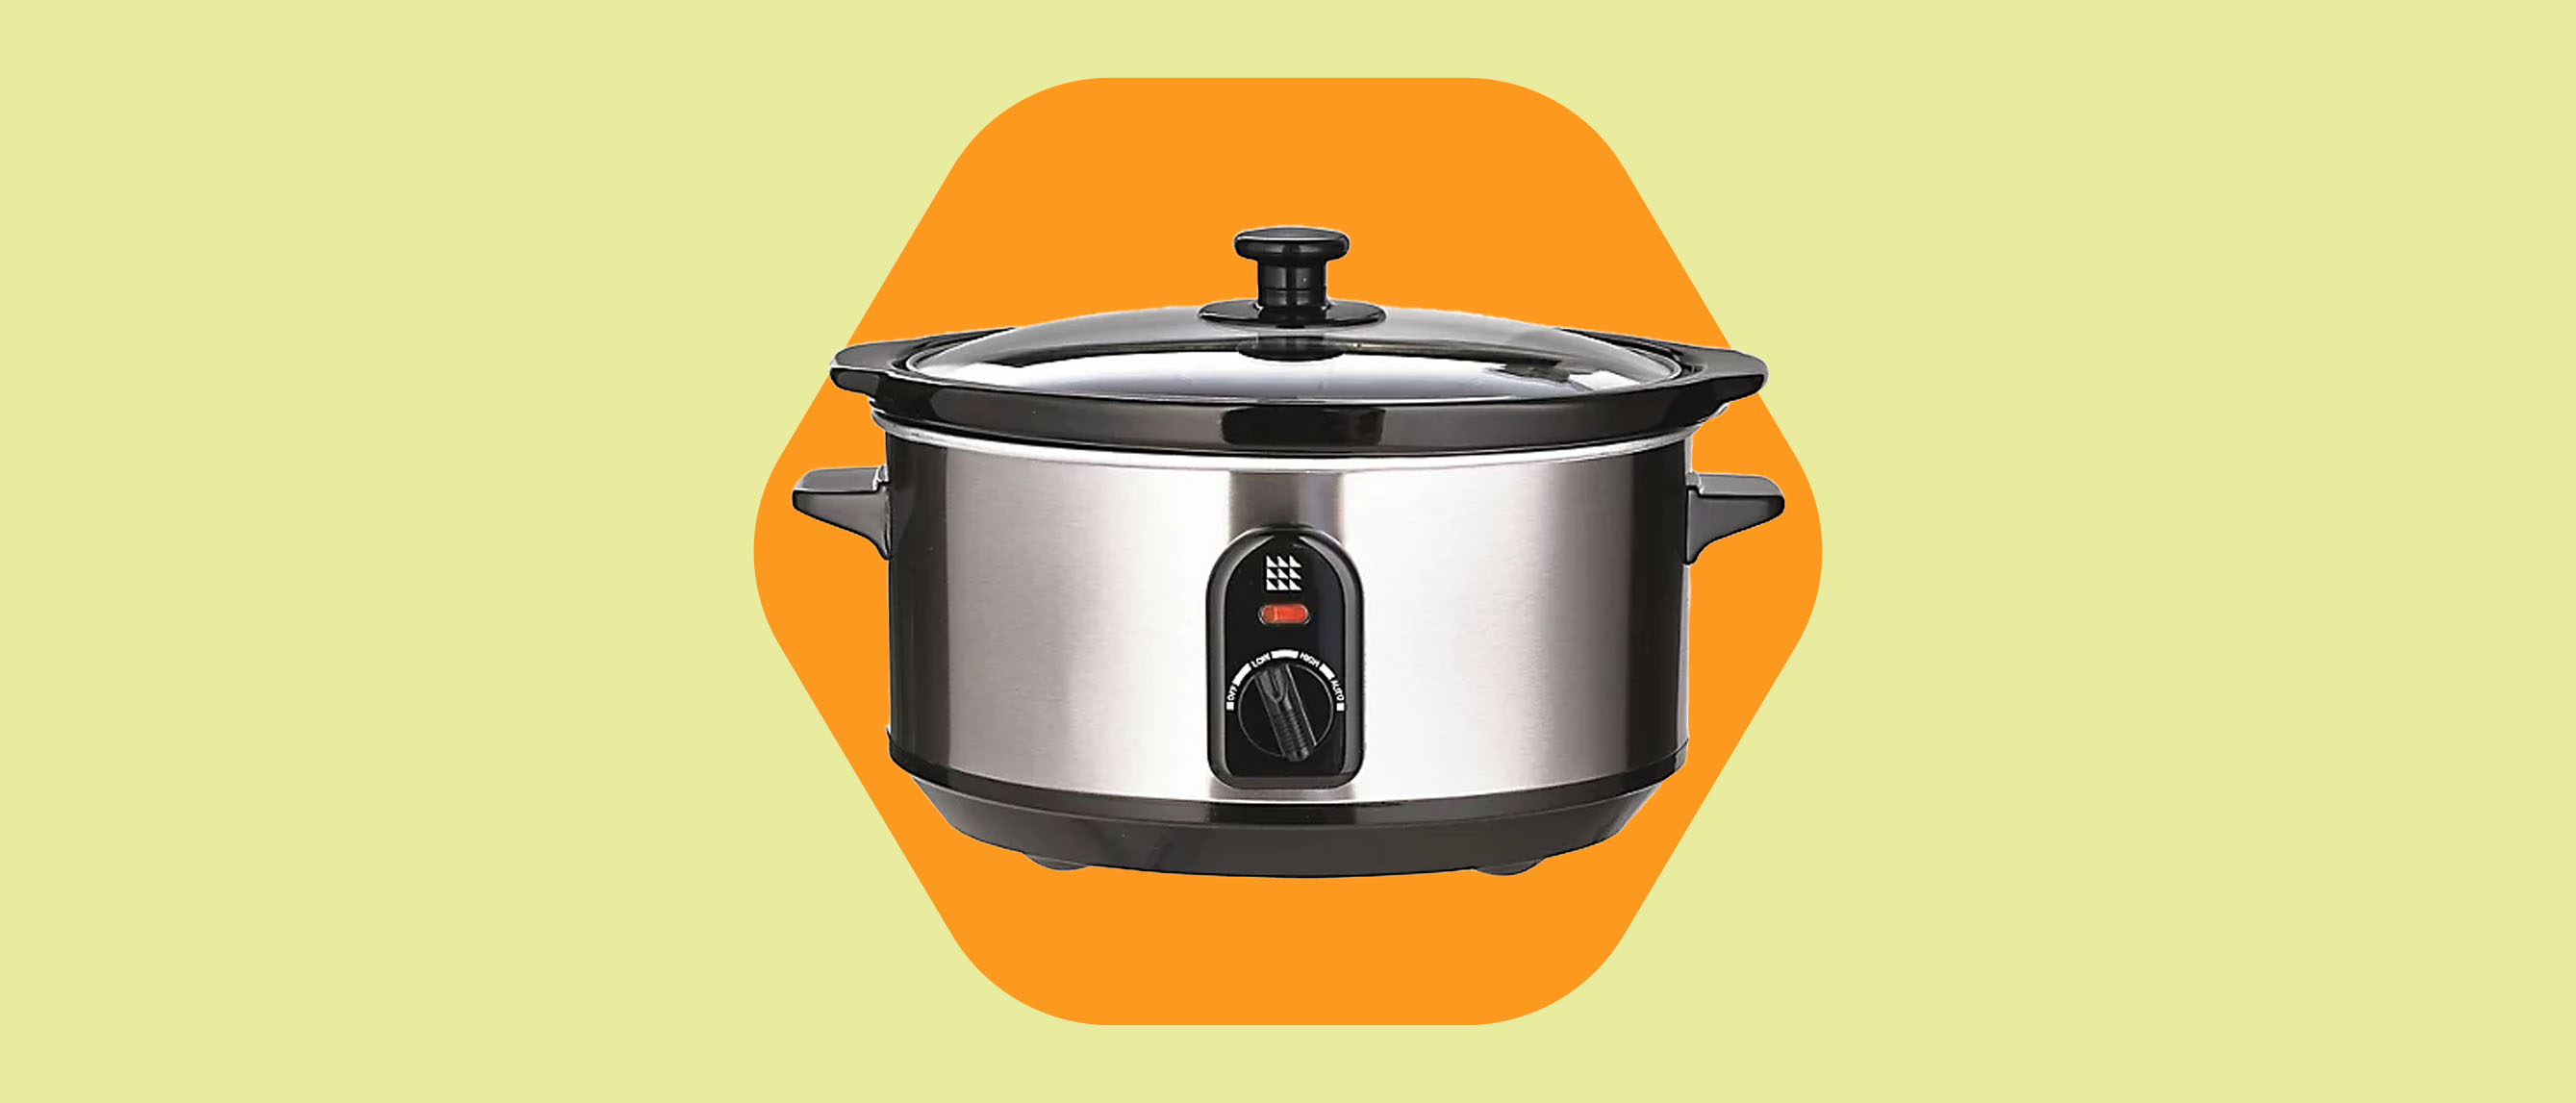 This DIY Crockpot Makeover Serves A Surprisingly Useful Purpose